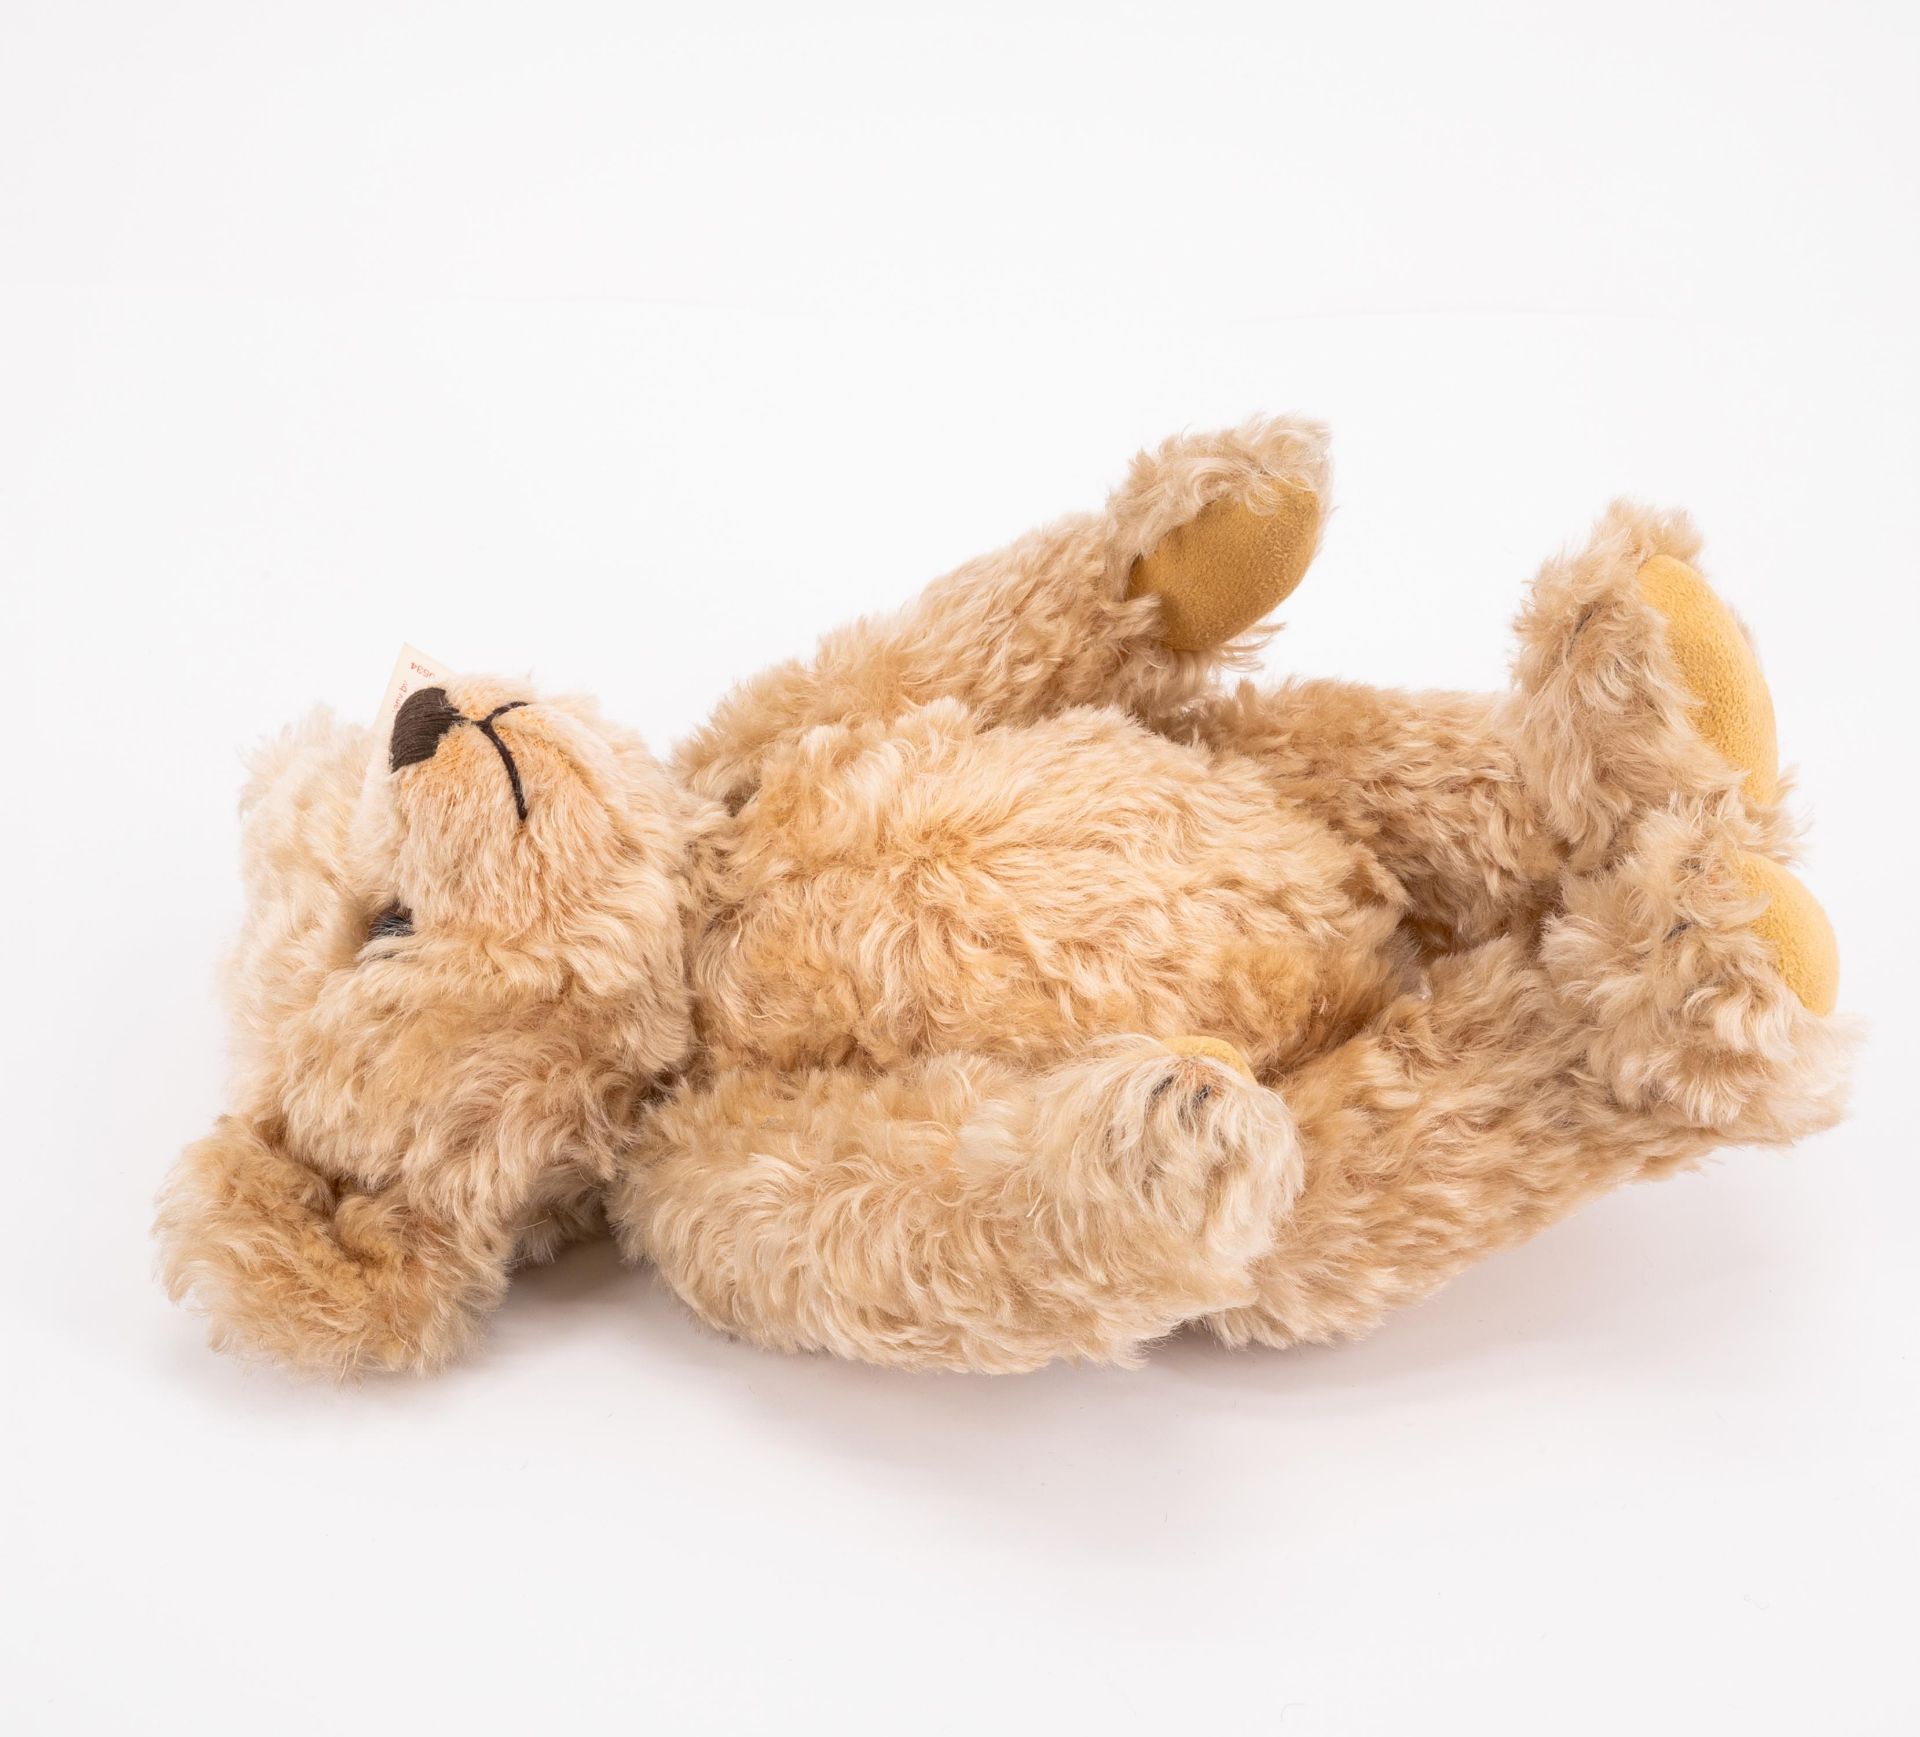 Steiff: TWO STEIFF BEARS FROM COLLECTORS EDITIONS MADE OF MOHAIR PLUSH, WOOL AND GLASS - Image 5 of 8